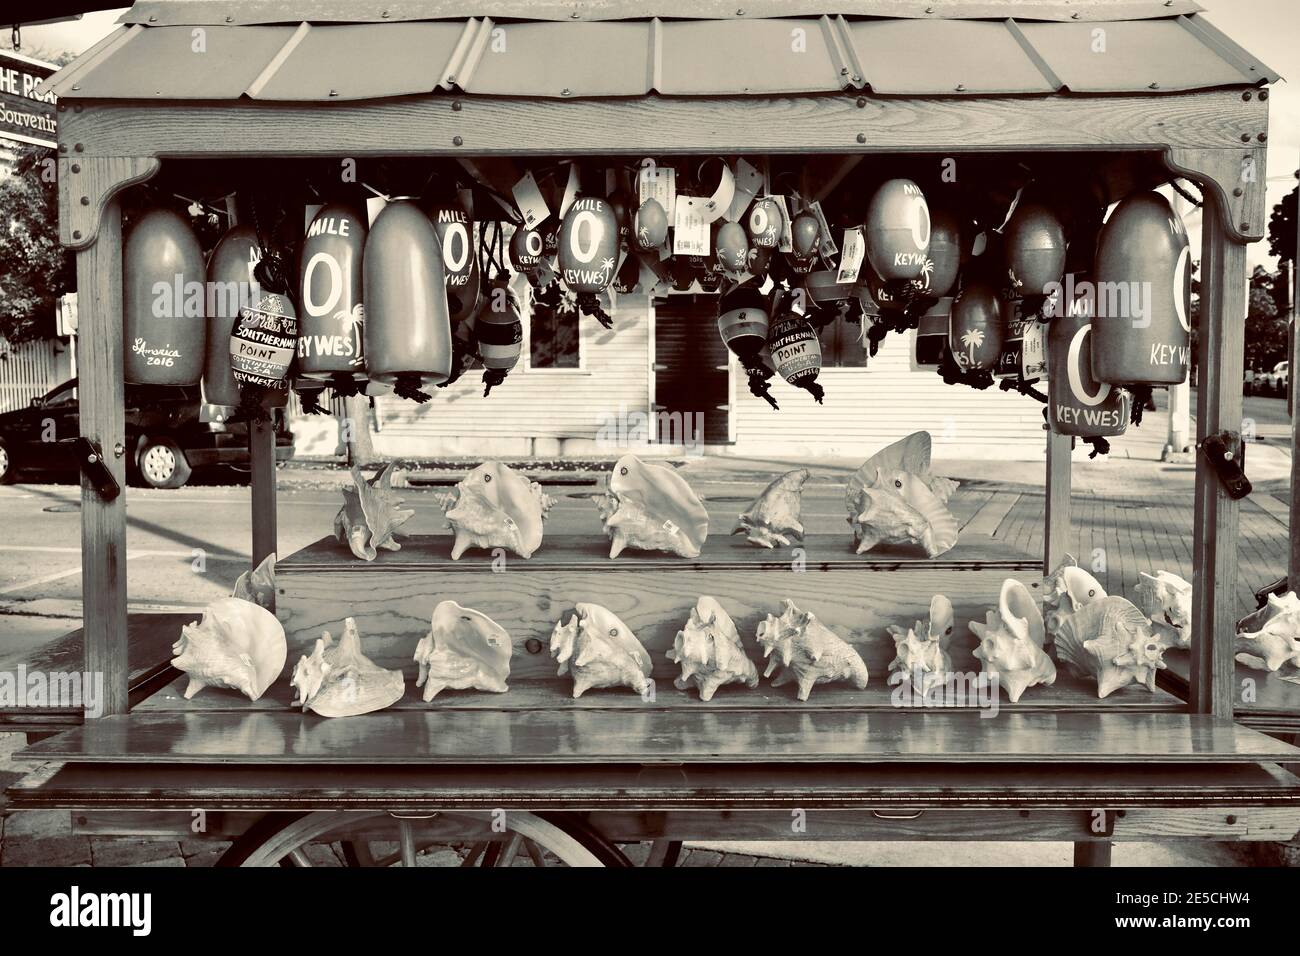 Souvenir cart selling Conch Shells in Key West, Florida, FL USA.  Southern most point in the continental USA.  Island vacation destination. Stock Photo